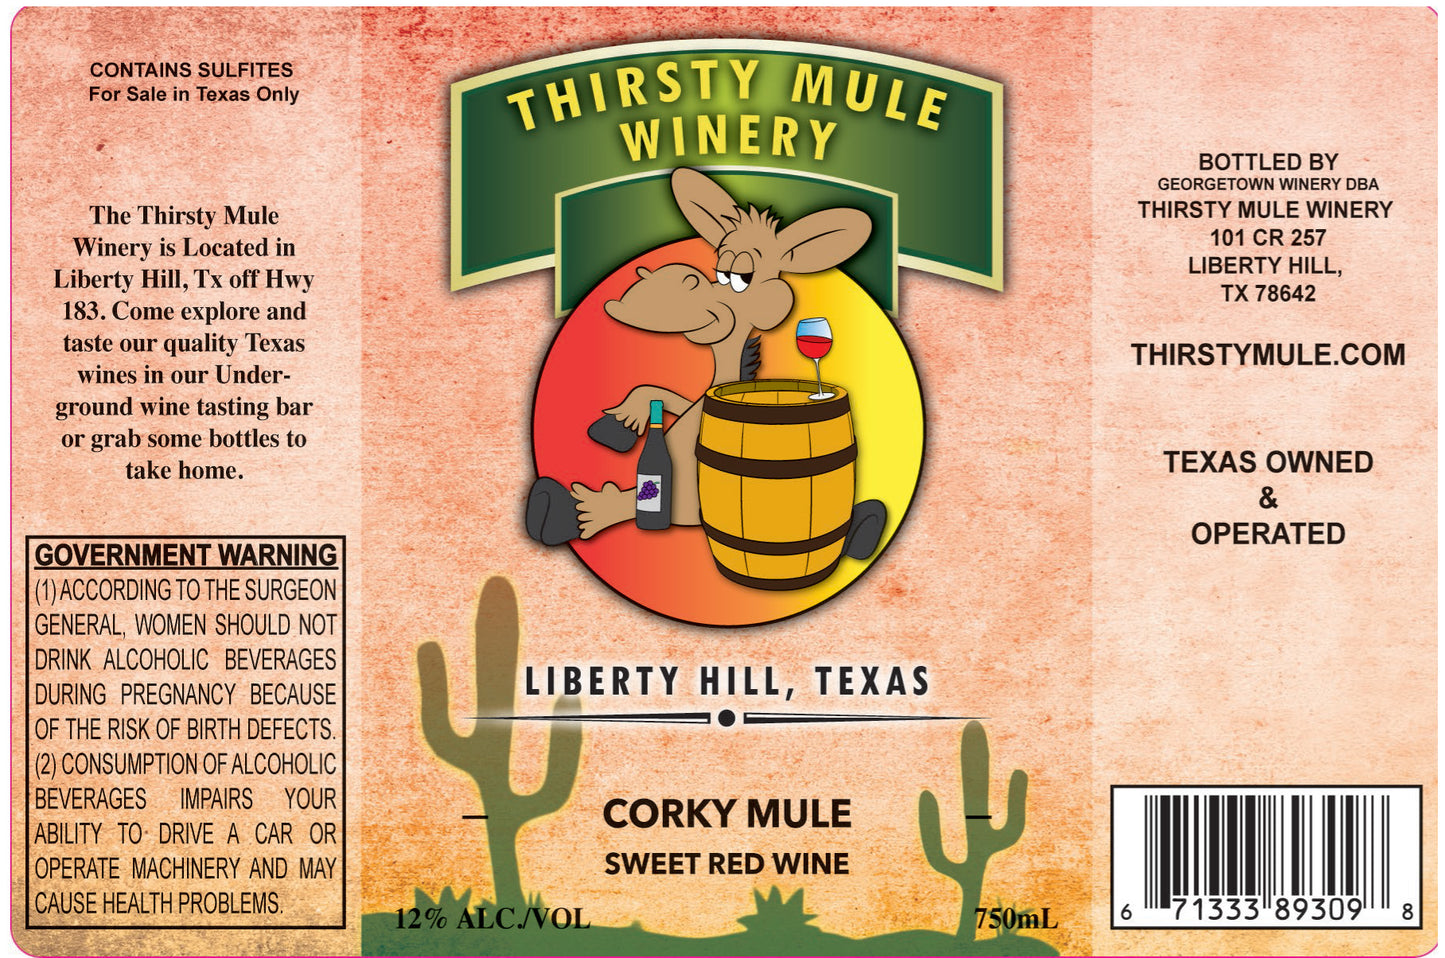 Thirsty Mule Winery Corky Mule Sweet Red NV